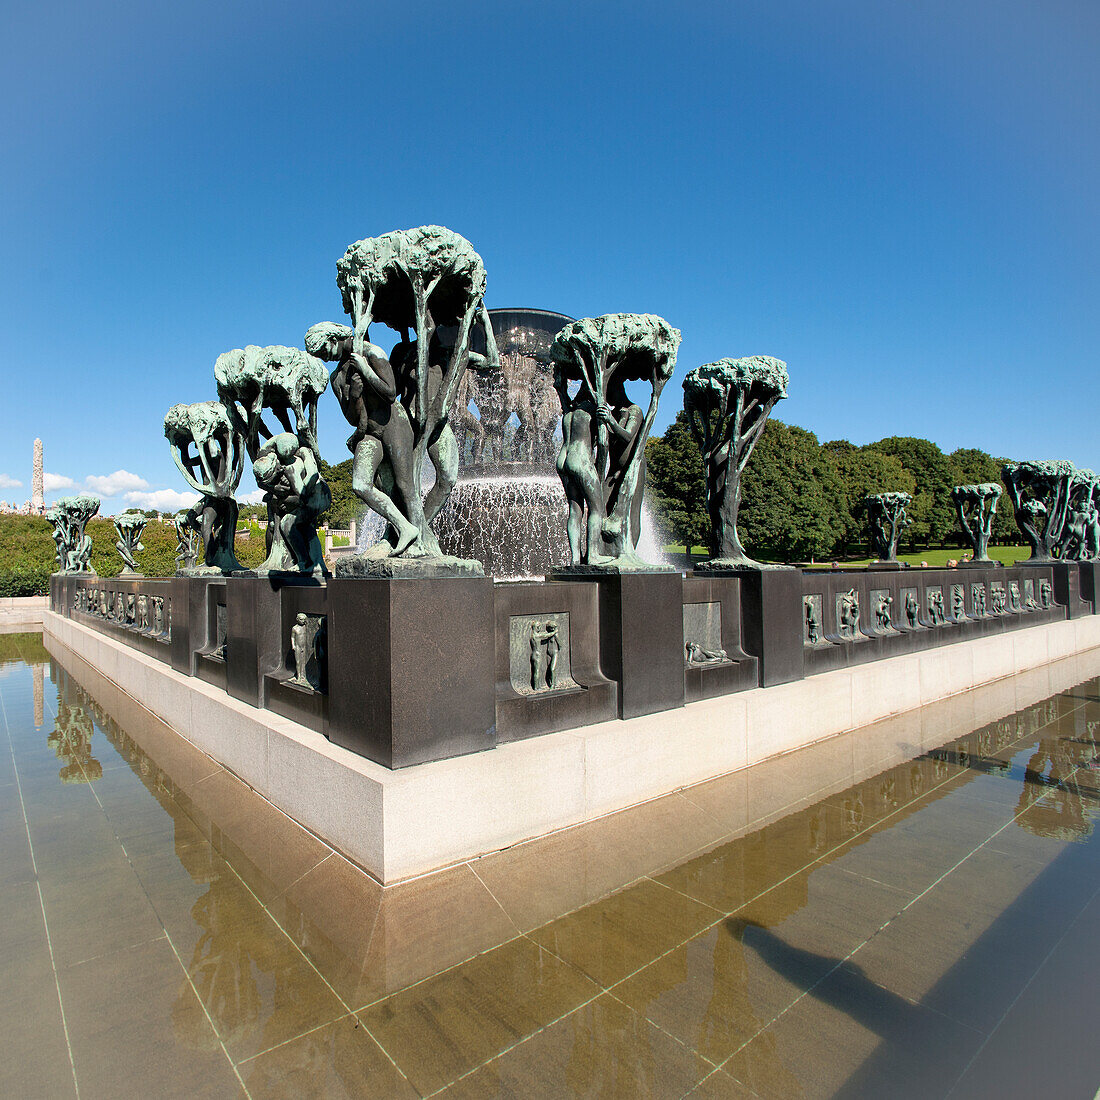 Sculptures And A Water Fountain In Frogner Park Vigeland Sculpture Park; Oslo Norway